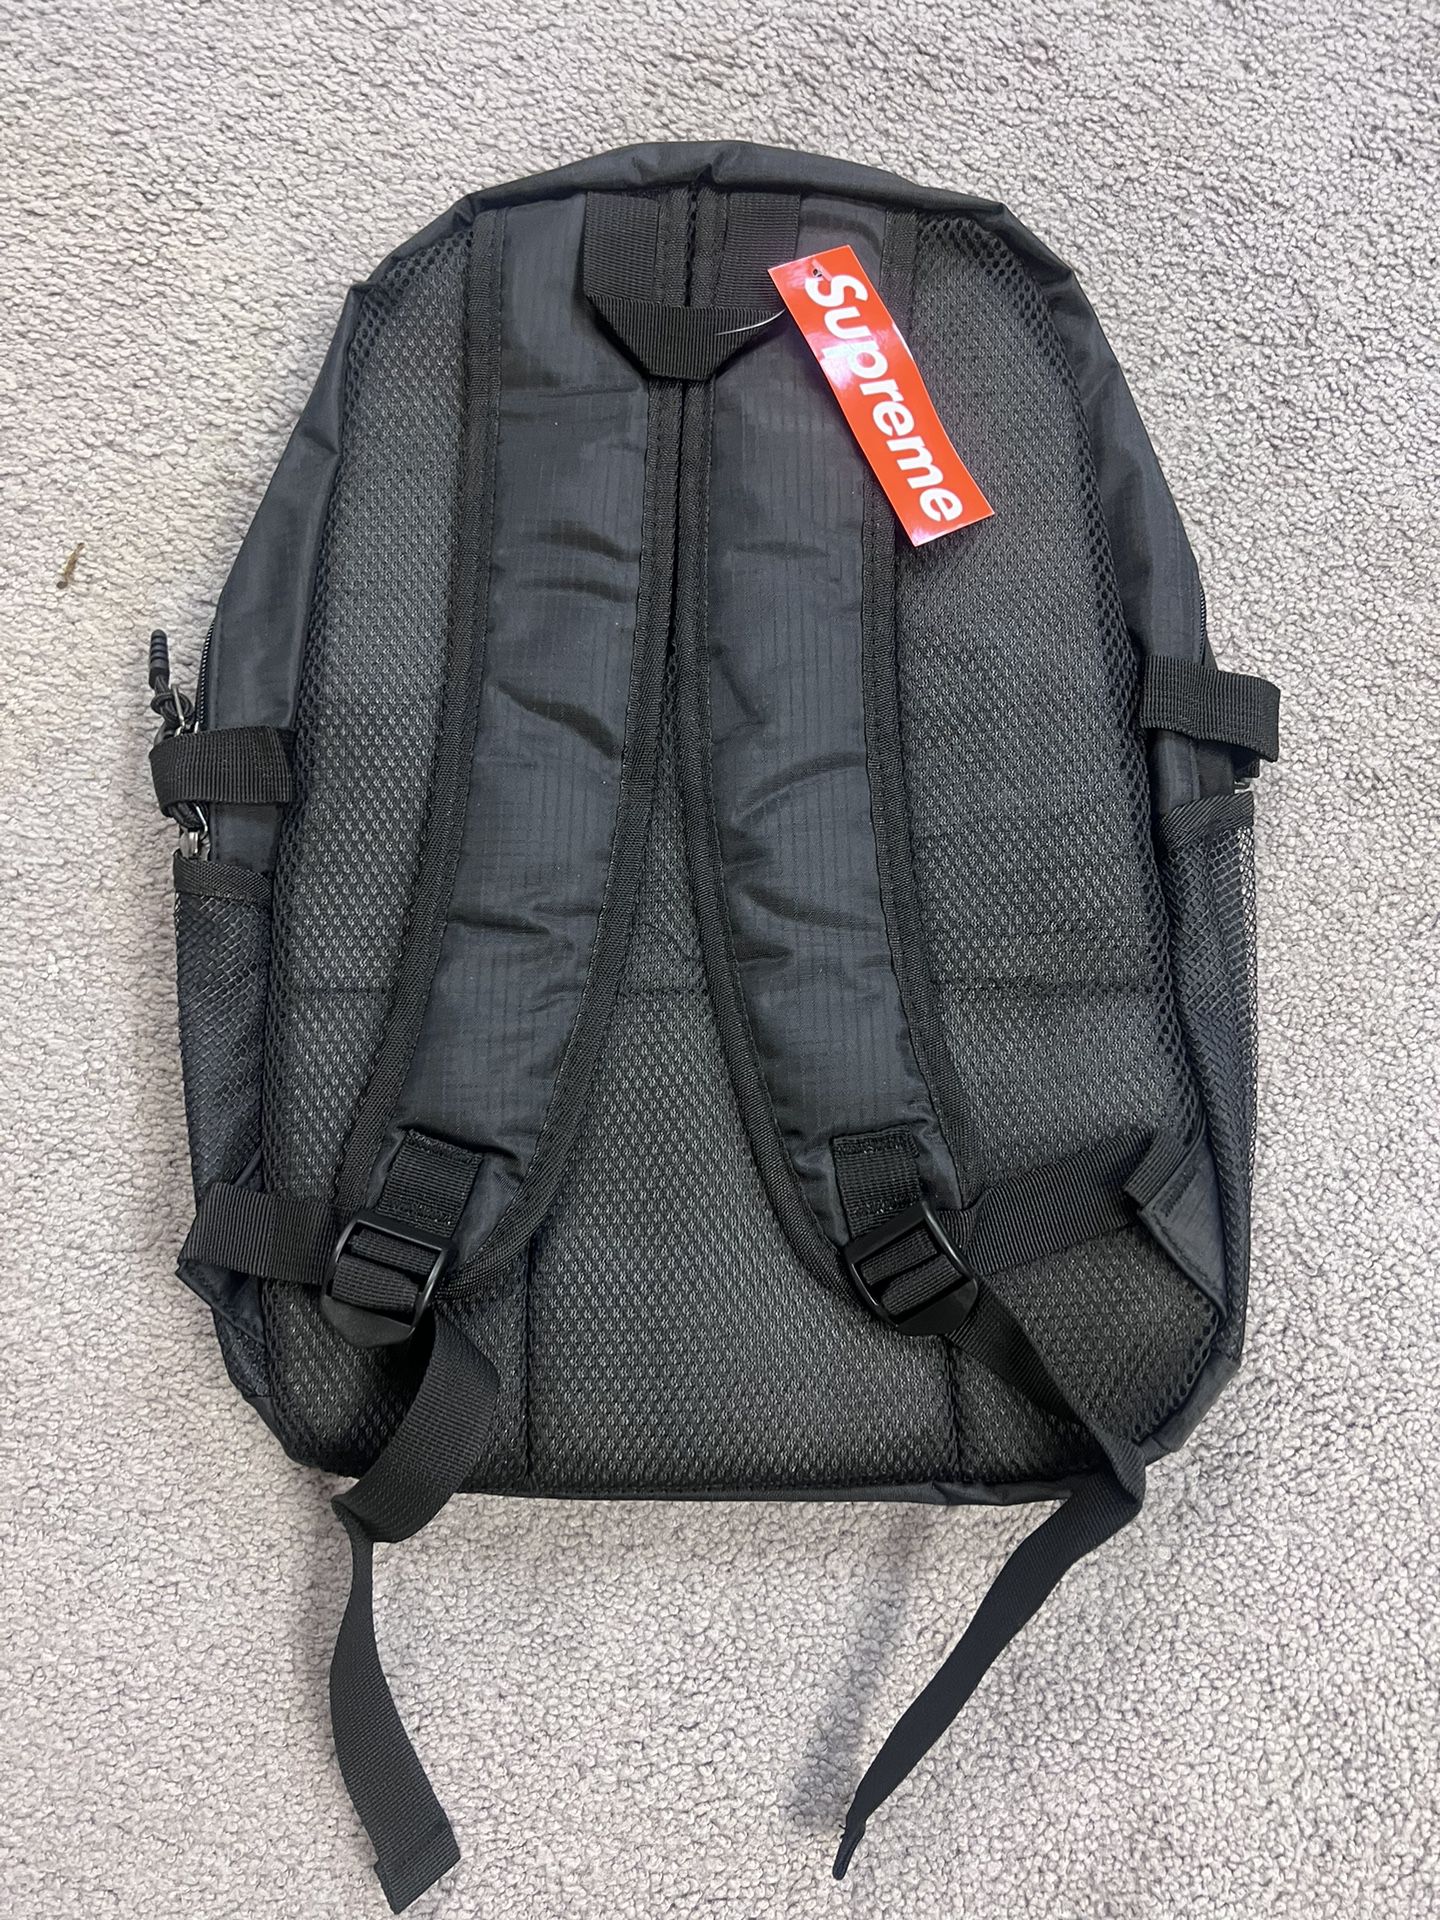 ss17 Supreme Backpack for Sale in Redmond, WA - OfferUp